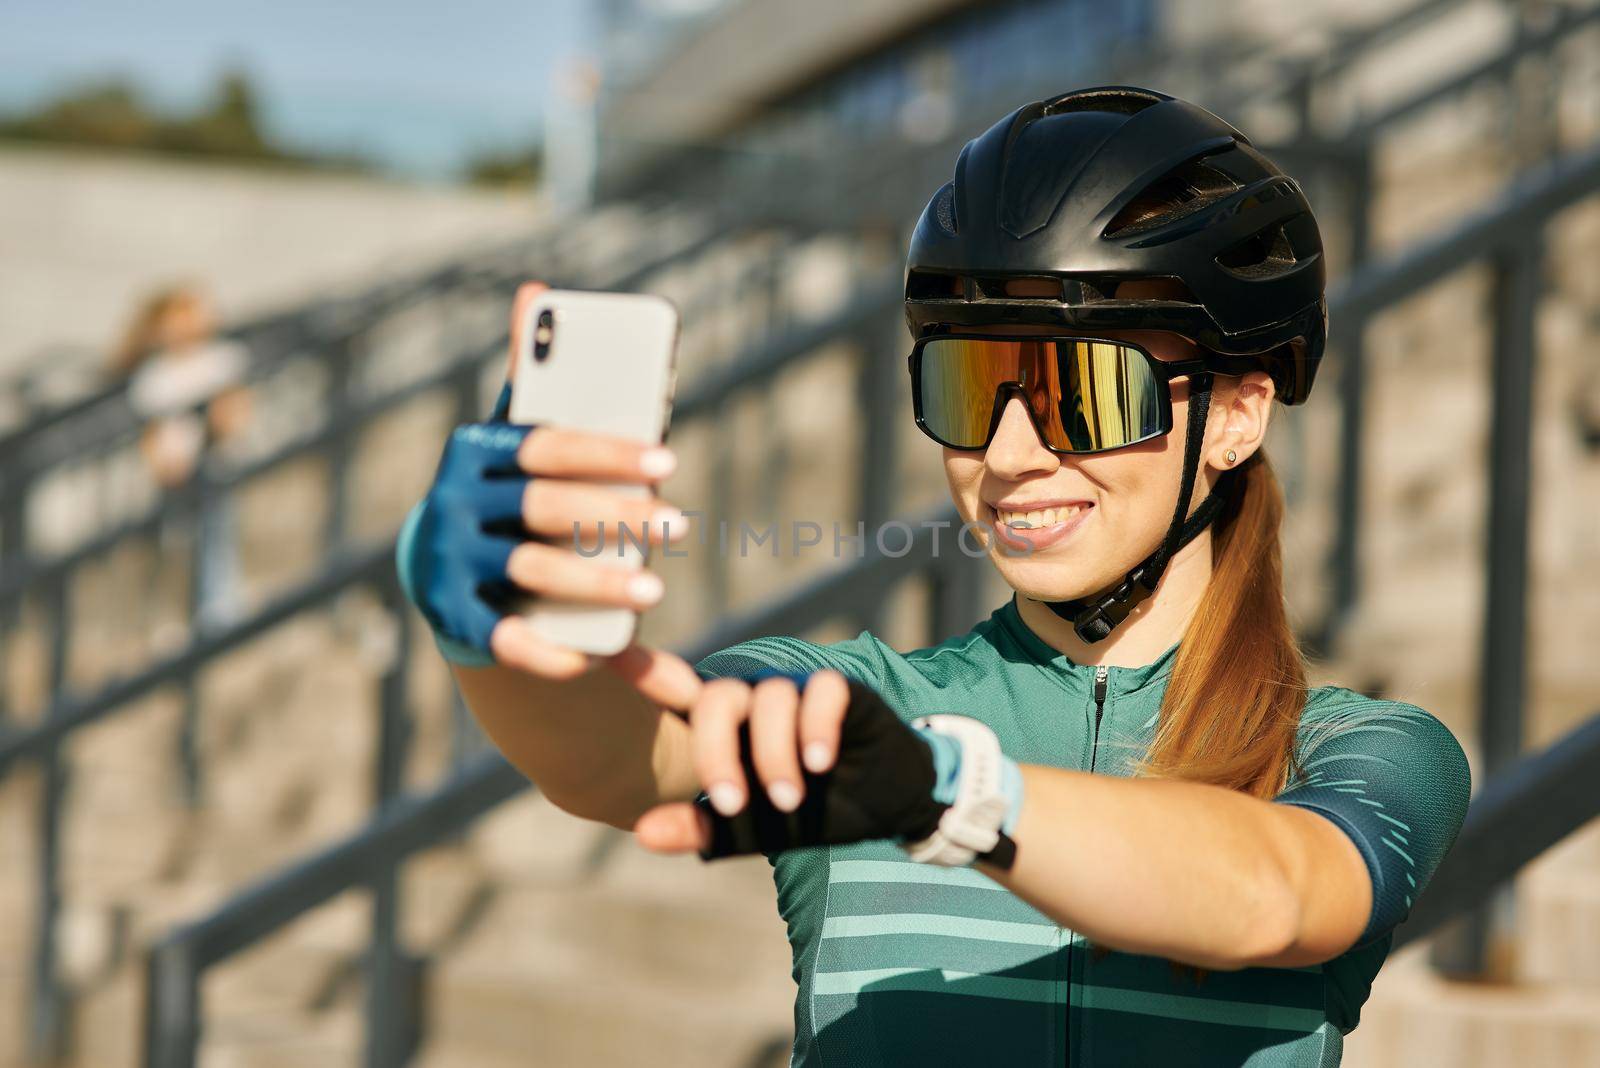 Portrait of cheerful professional female cyclist in cycling garment and protective gear smiling while taking selfie using smartphone, resting after riding bicycle in city center by friendsstock